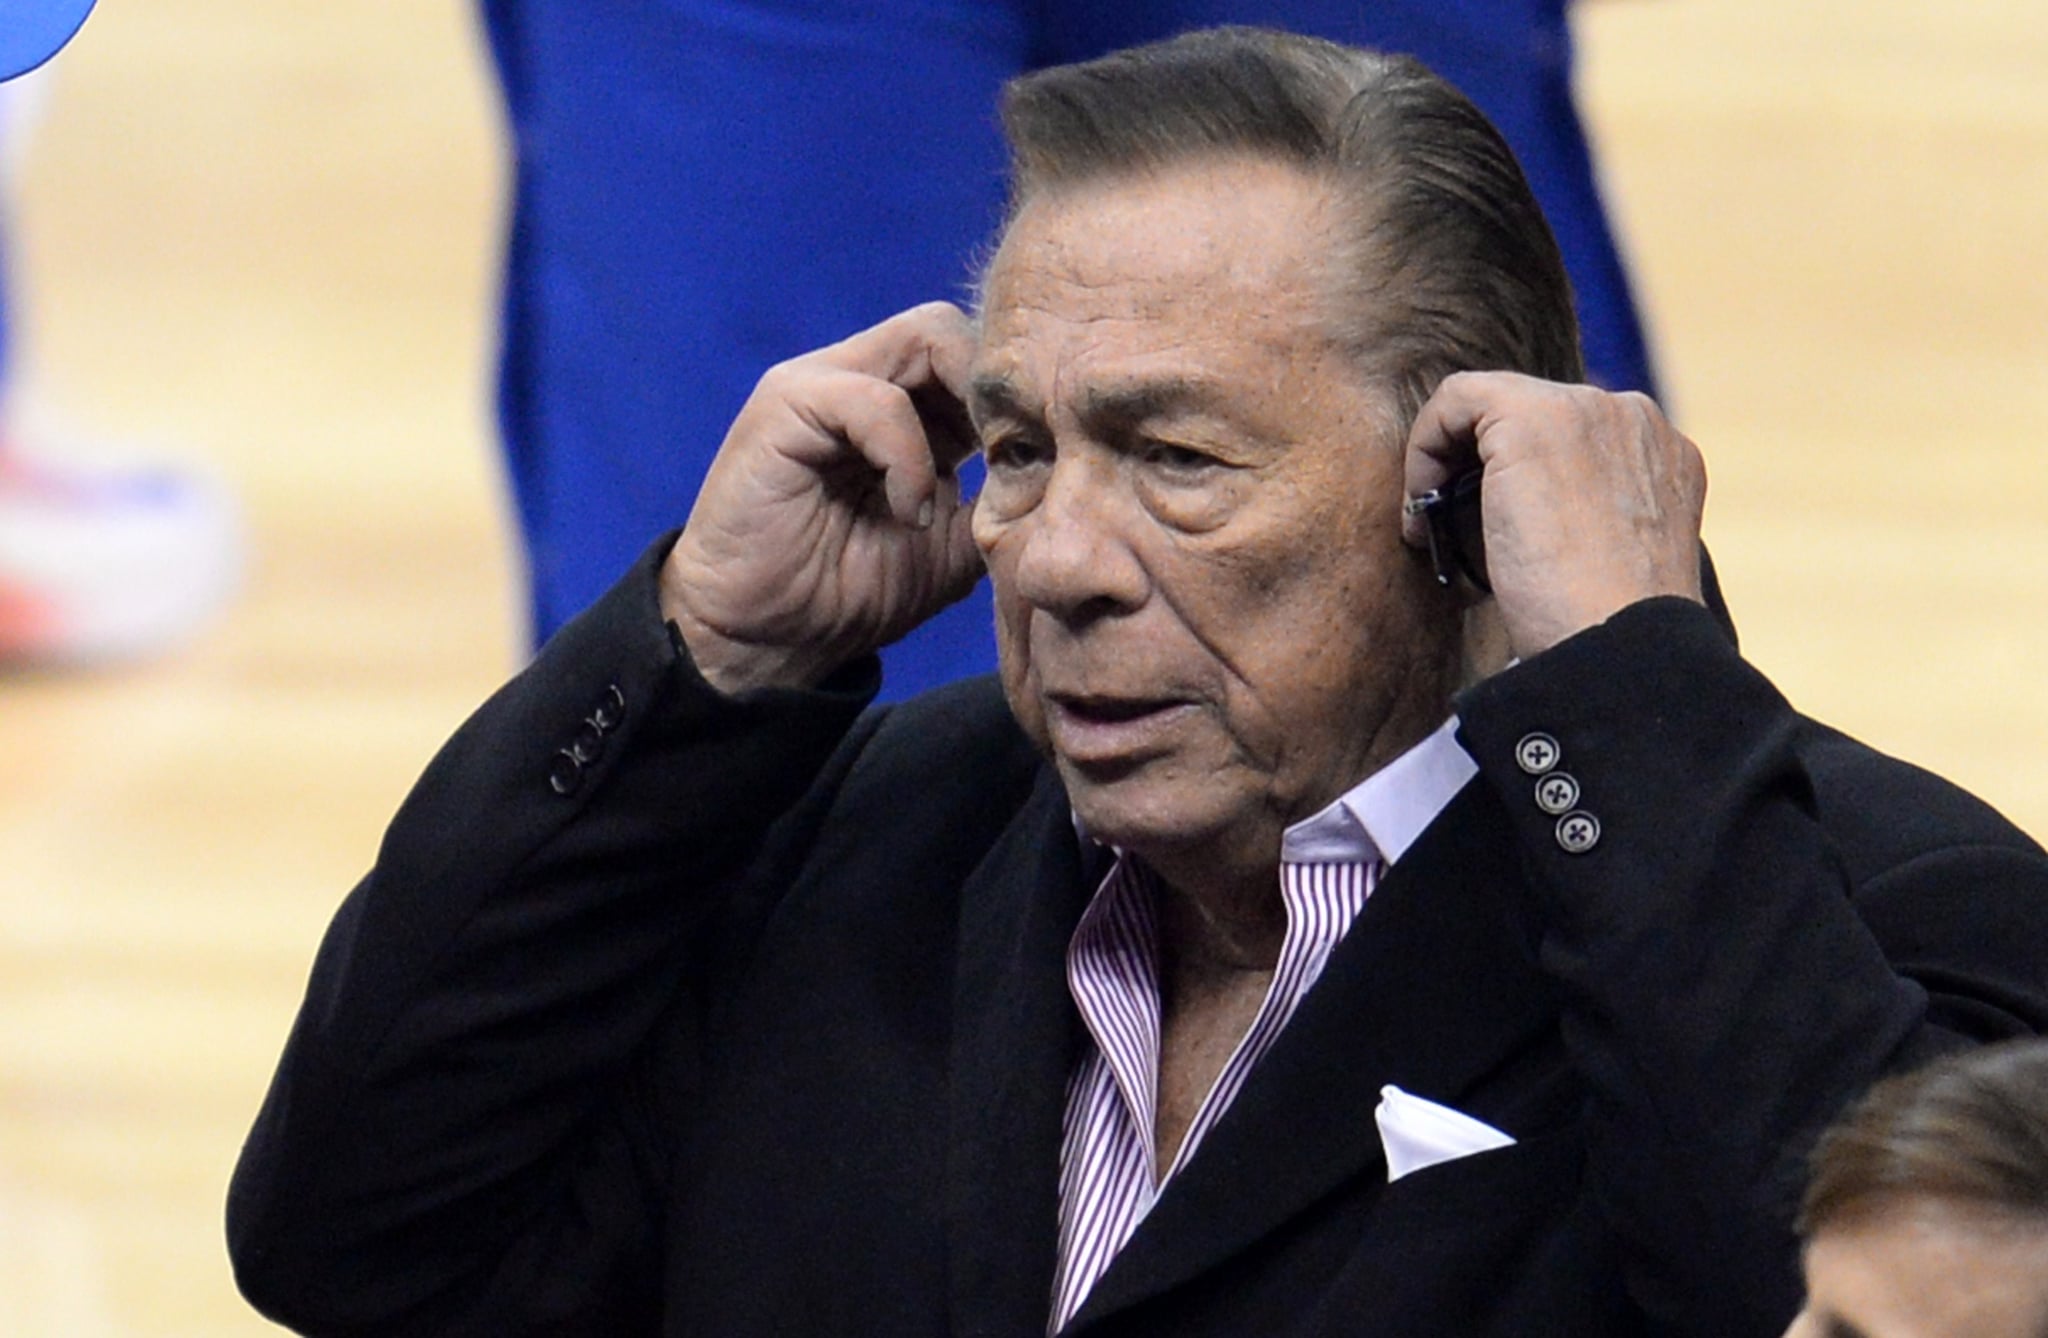 Los Angeles Clippers owner Donald Sterling attends the NBA playoff game between the Clippers and the Golden State Warriors, April 21, 2014 at Staples Center in Los Angeles, California.  NBA Commissioner Adam Silver said April 26 that the NBA is investigating Sterling for alleged racist comments. AFP PHOTO / ROBYN BECK        (Photo credit should read ROBYN BECK/AFP via Getty Images)